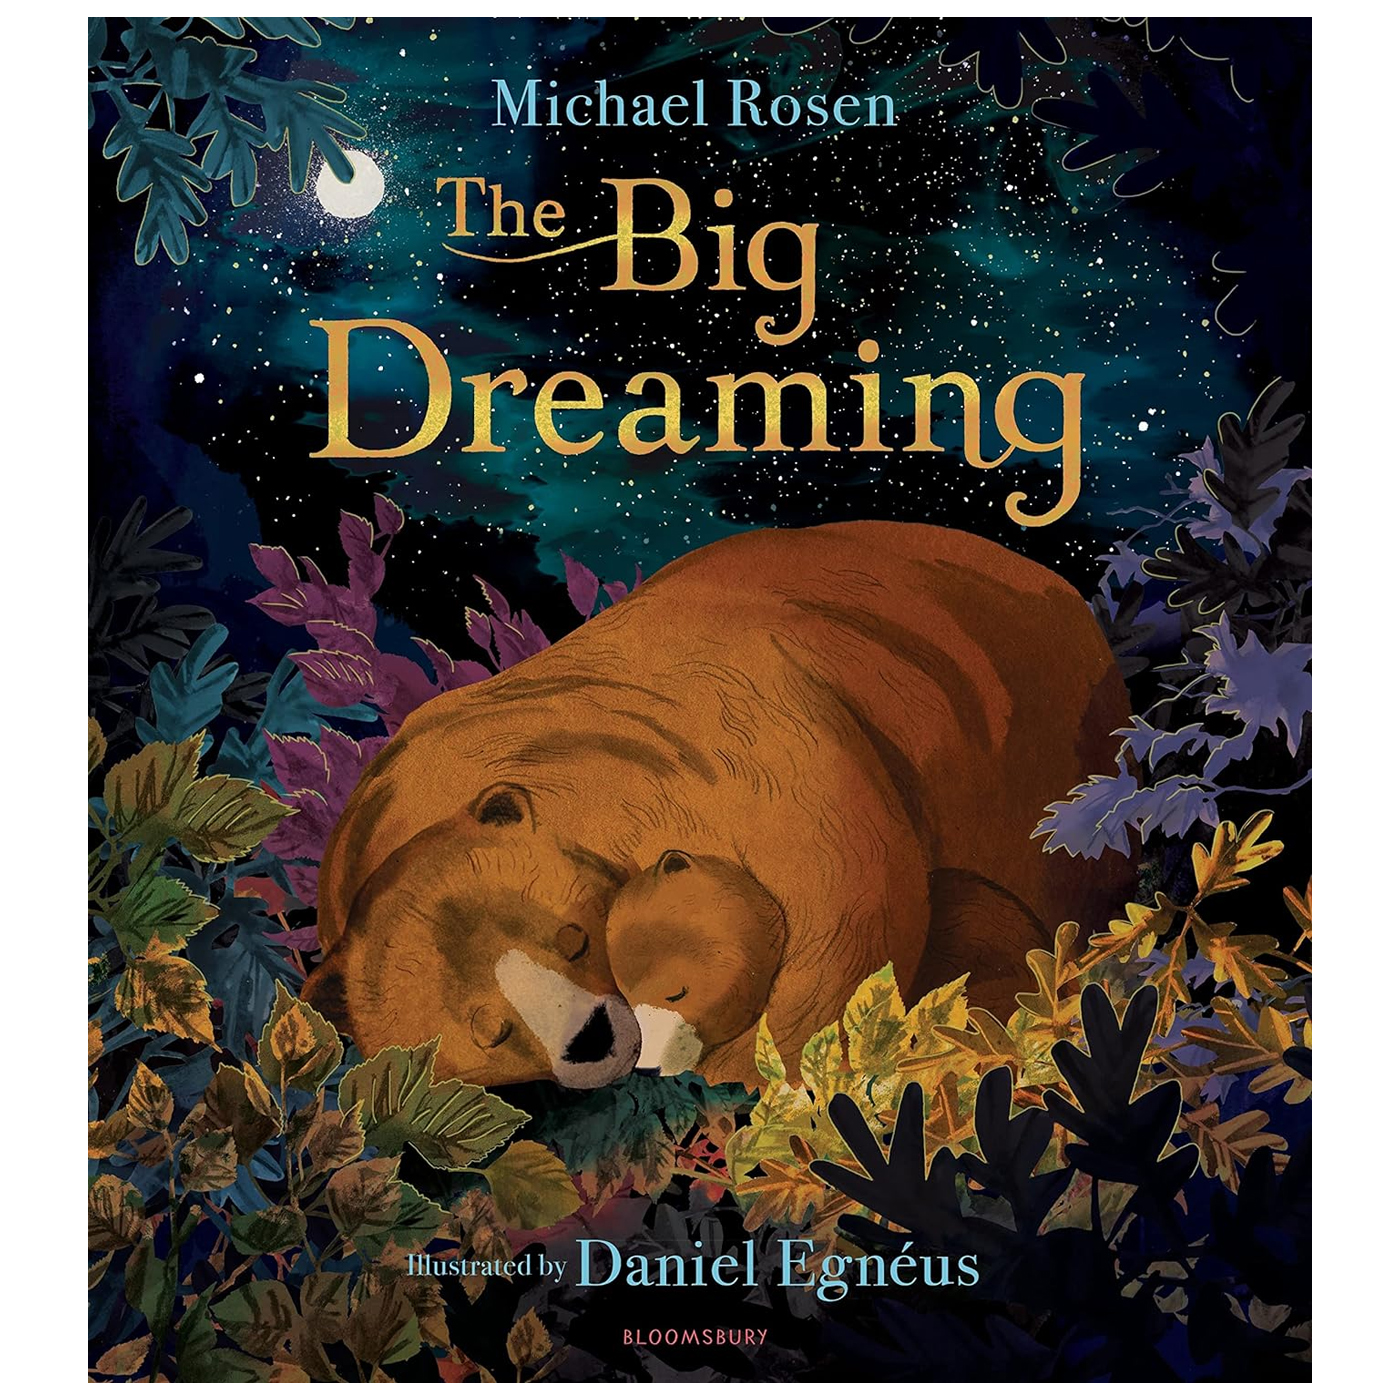  The Big Dreaming